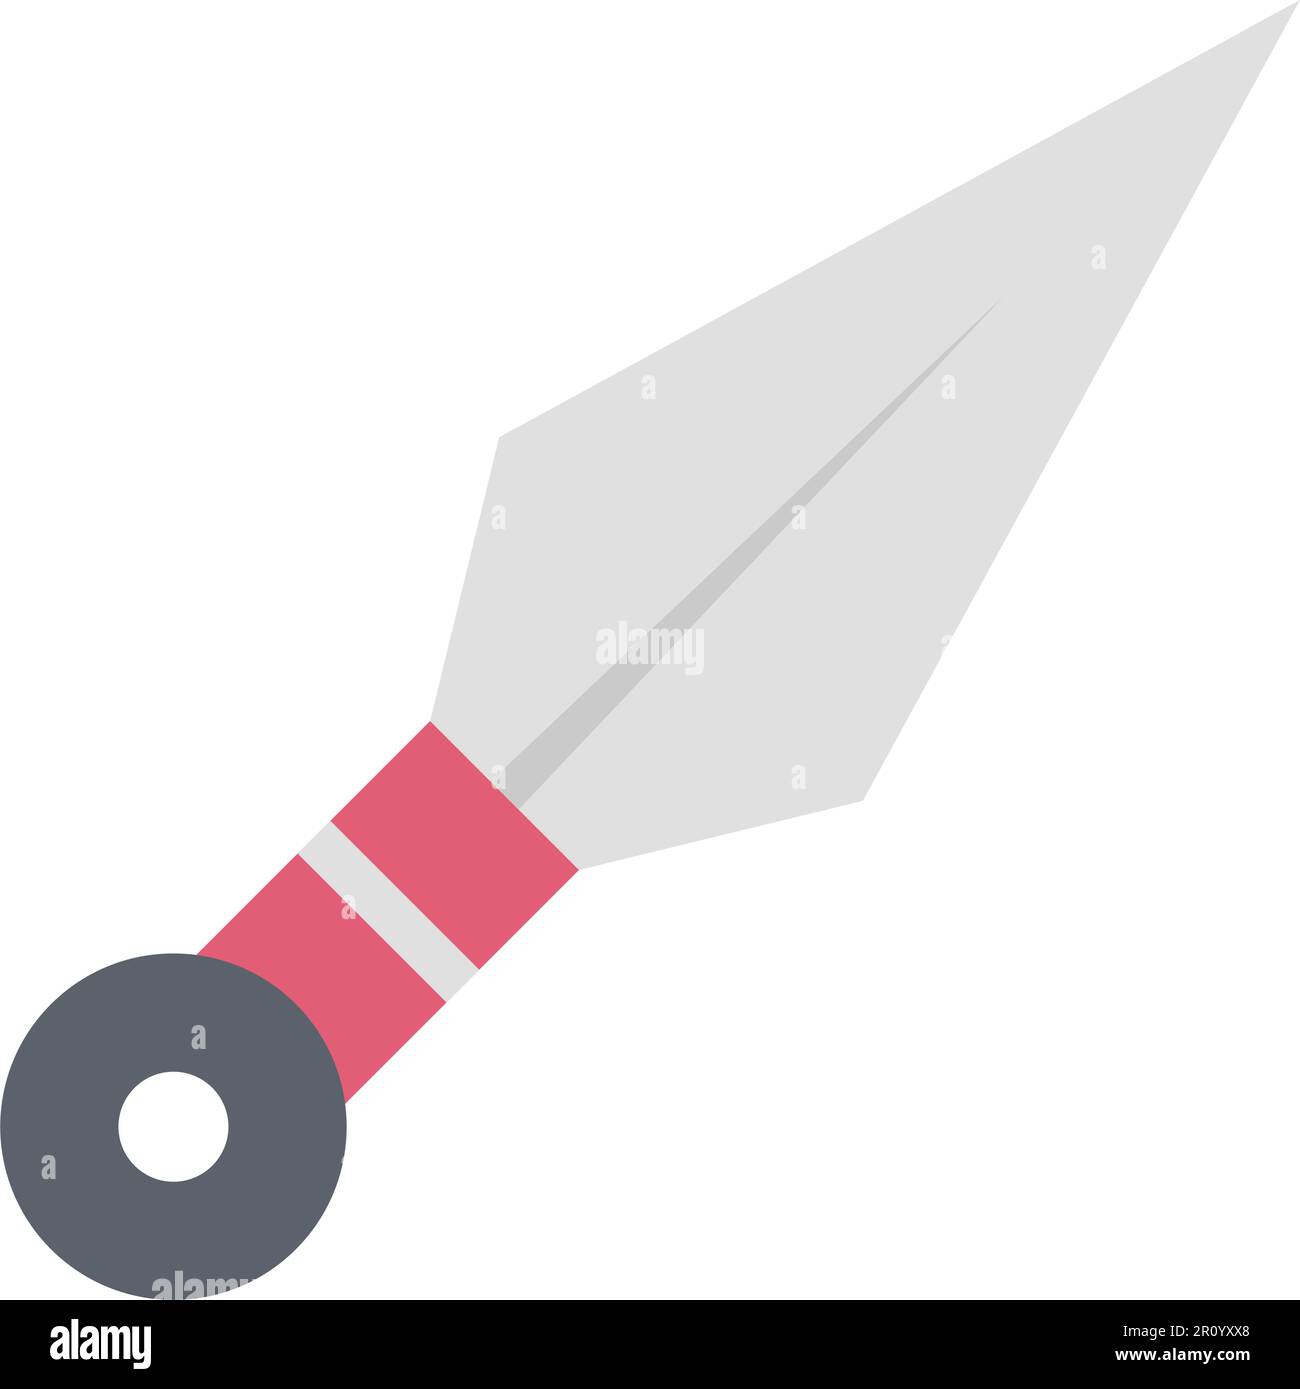 Kunai icon vector image. Suitable for mobile apps, web apps and print media. Stock Vector